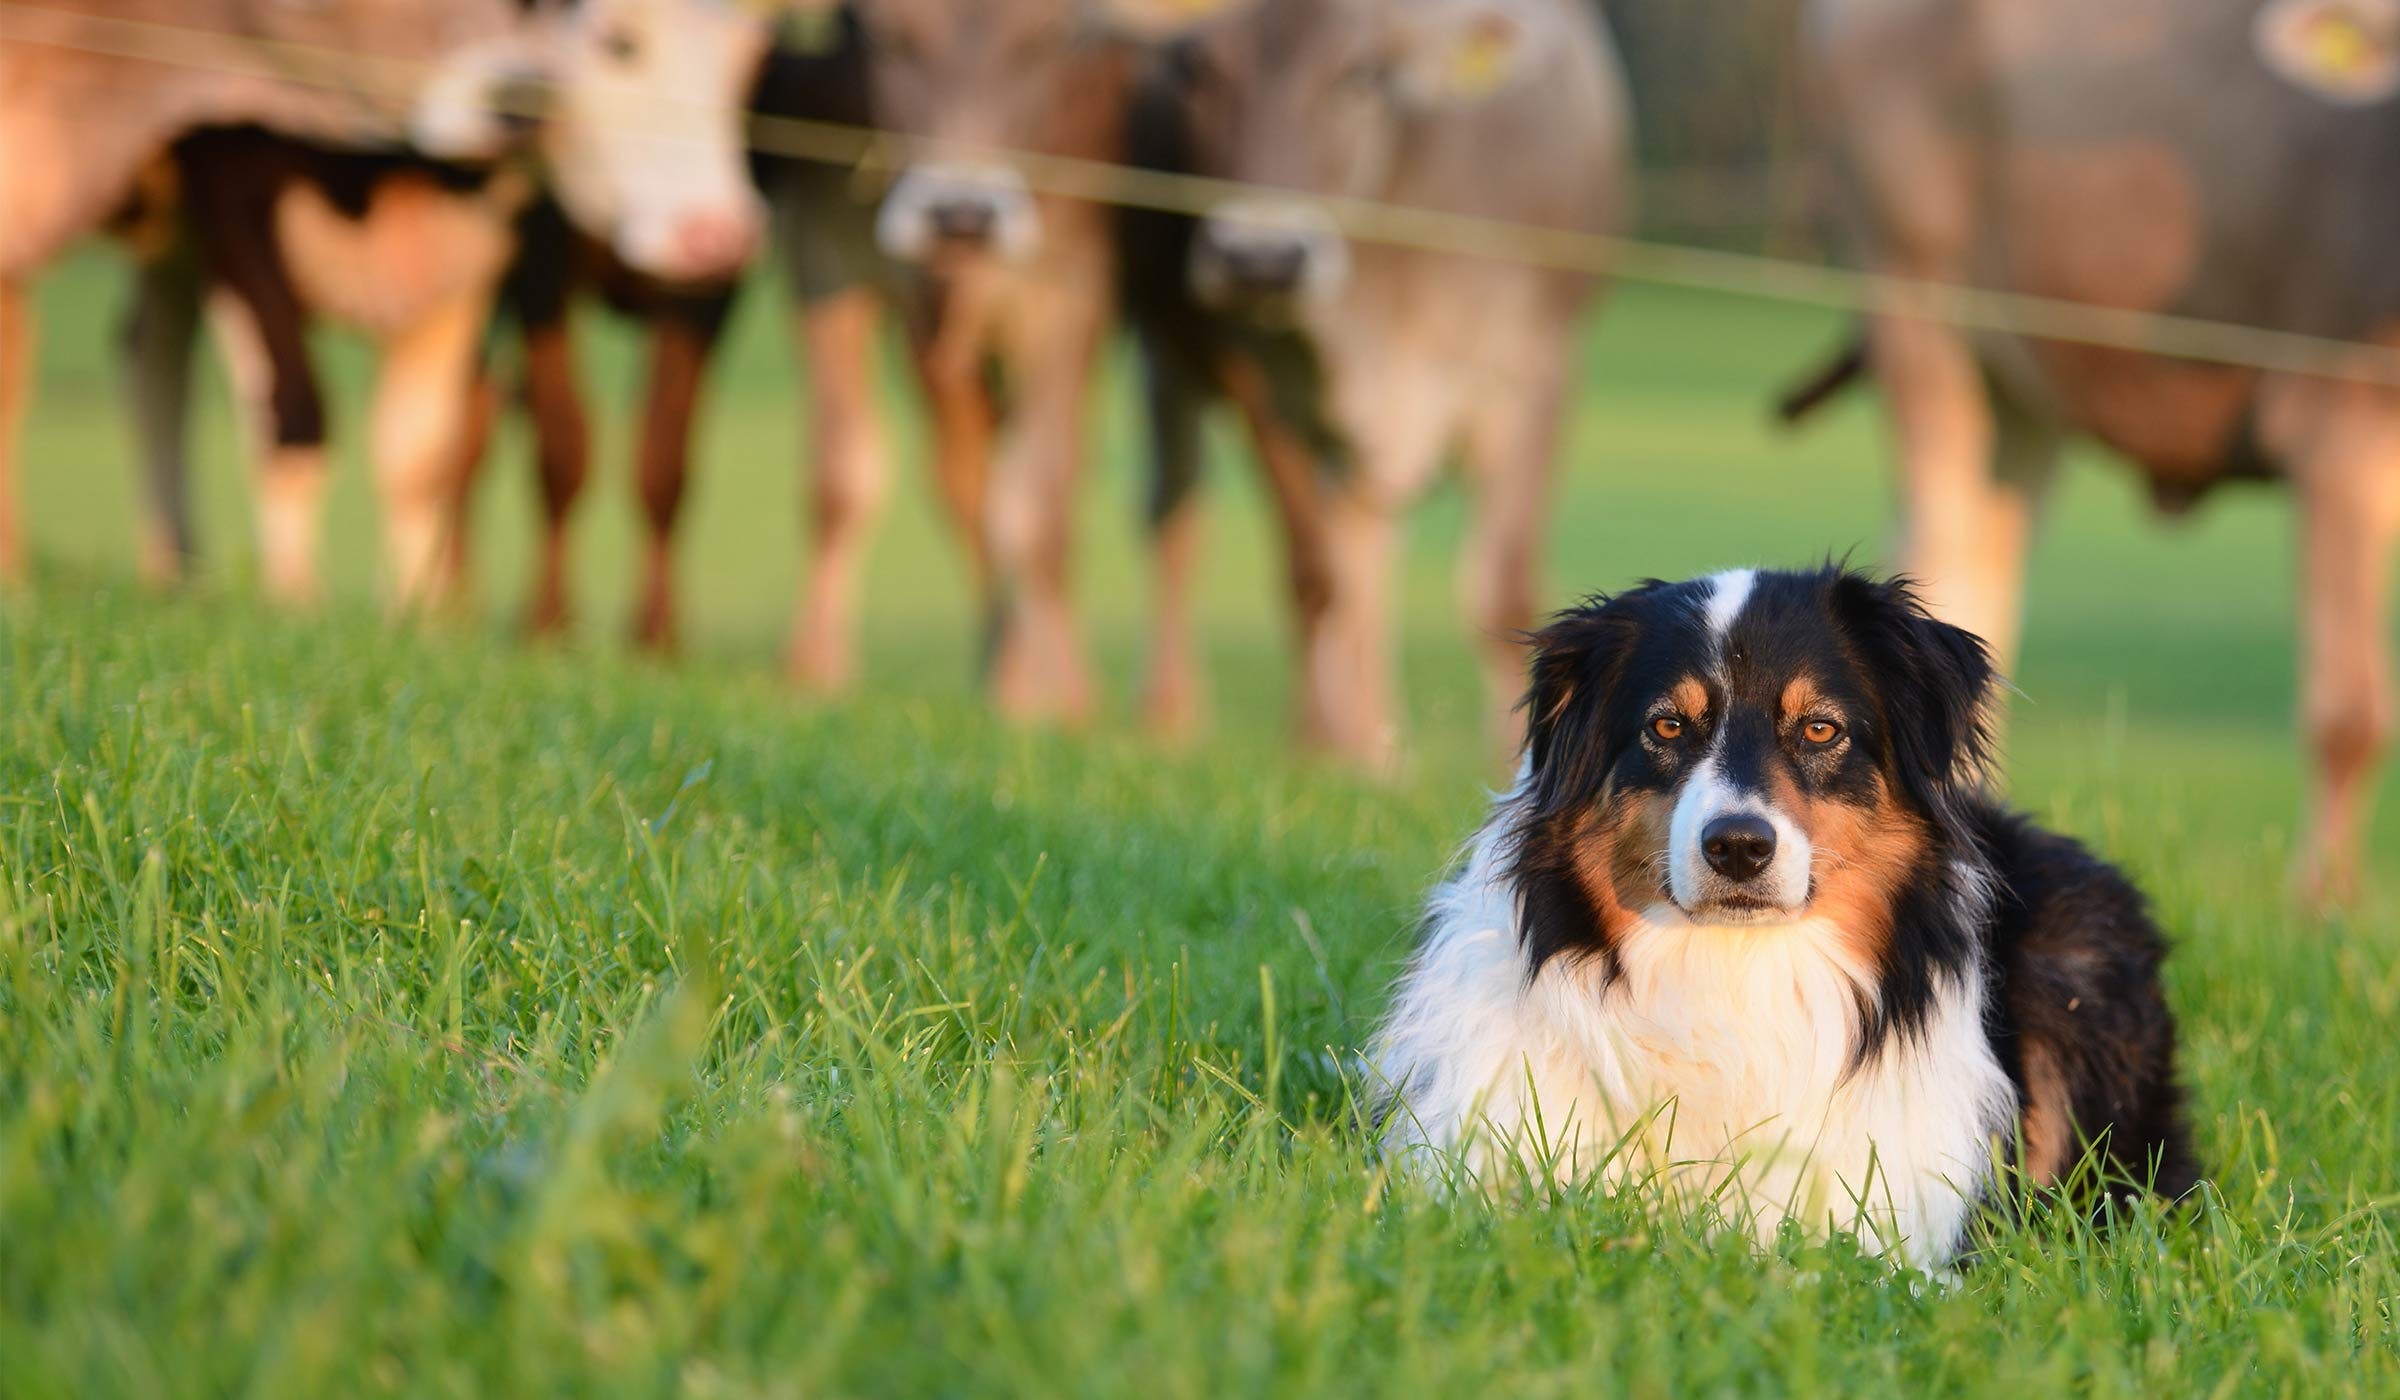 The Herding Dogs Breeds Breed Profile, Facts, Images